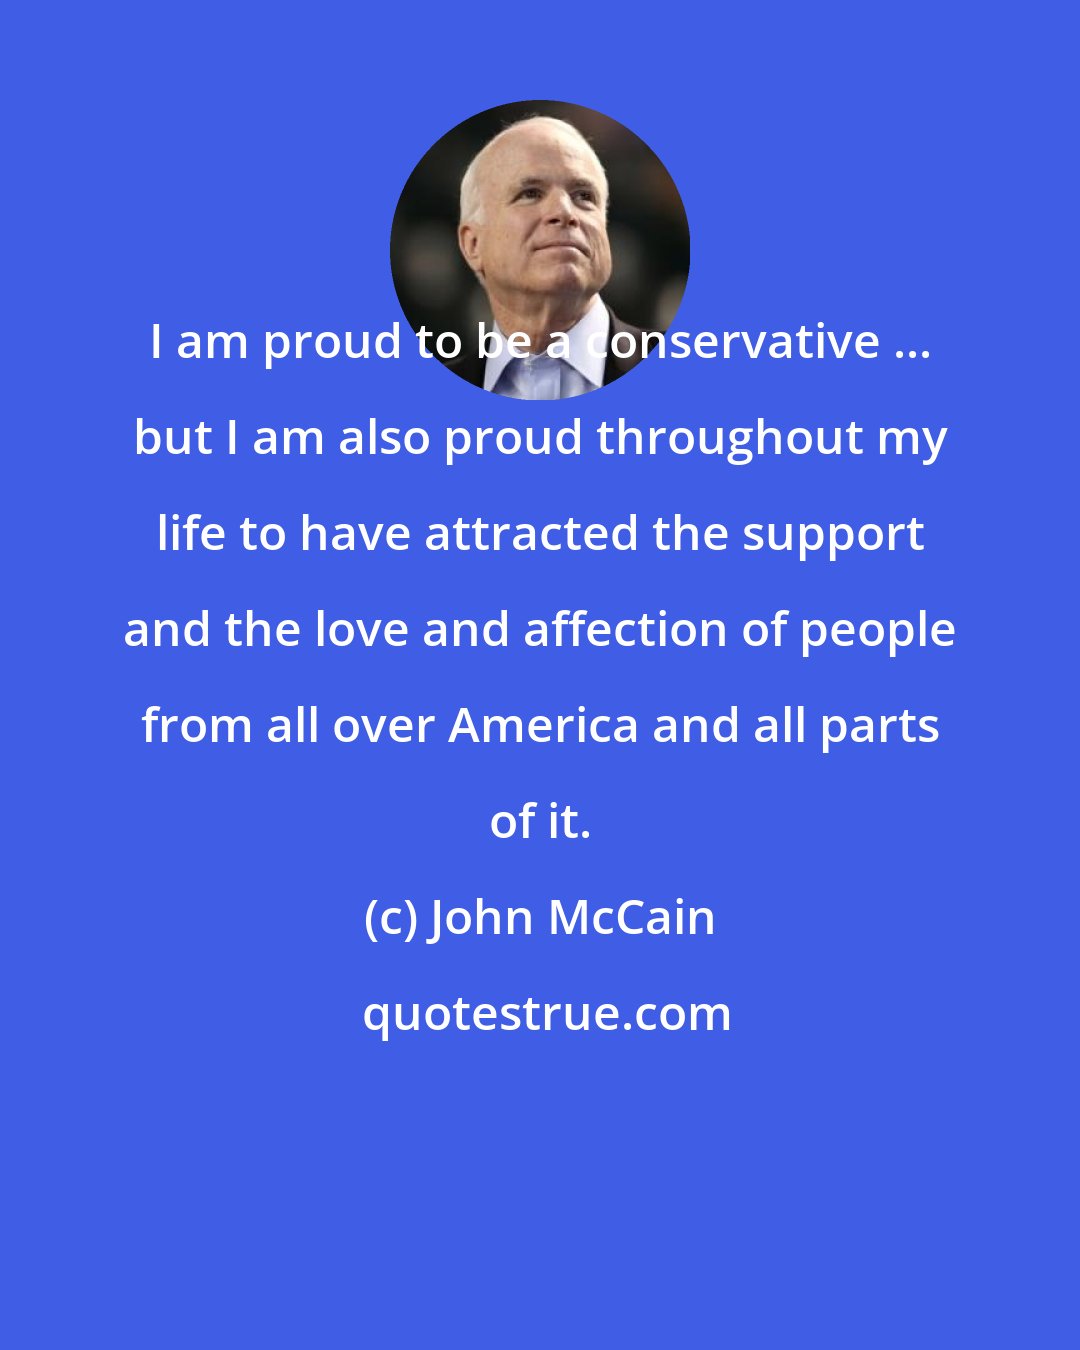 John McCain: I am proud to be a conservative ... but I am also proud throughout my life to have attracted the support and the love and affection of people from all over America and all parts of it.